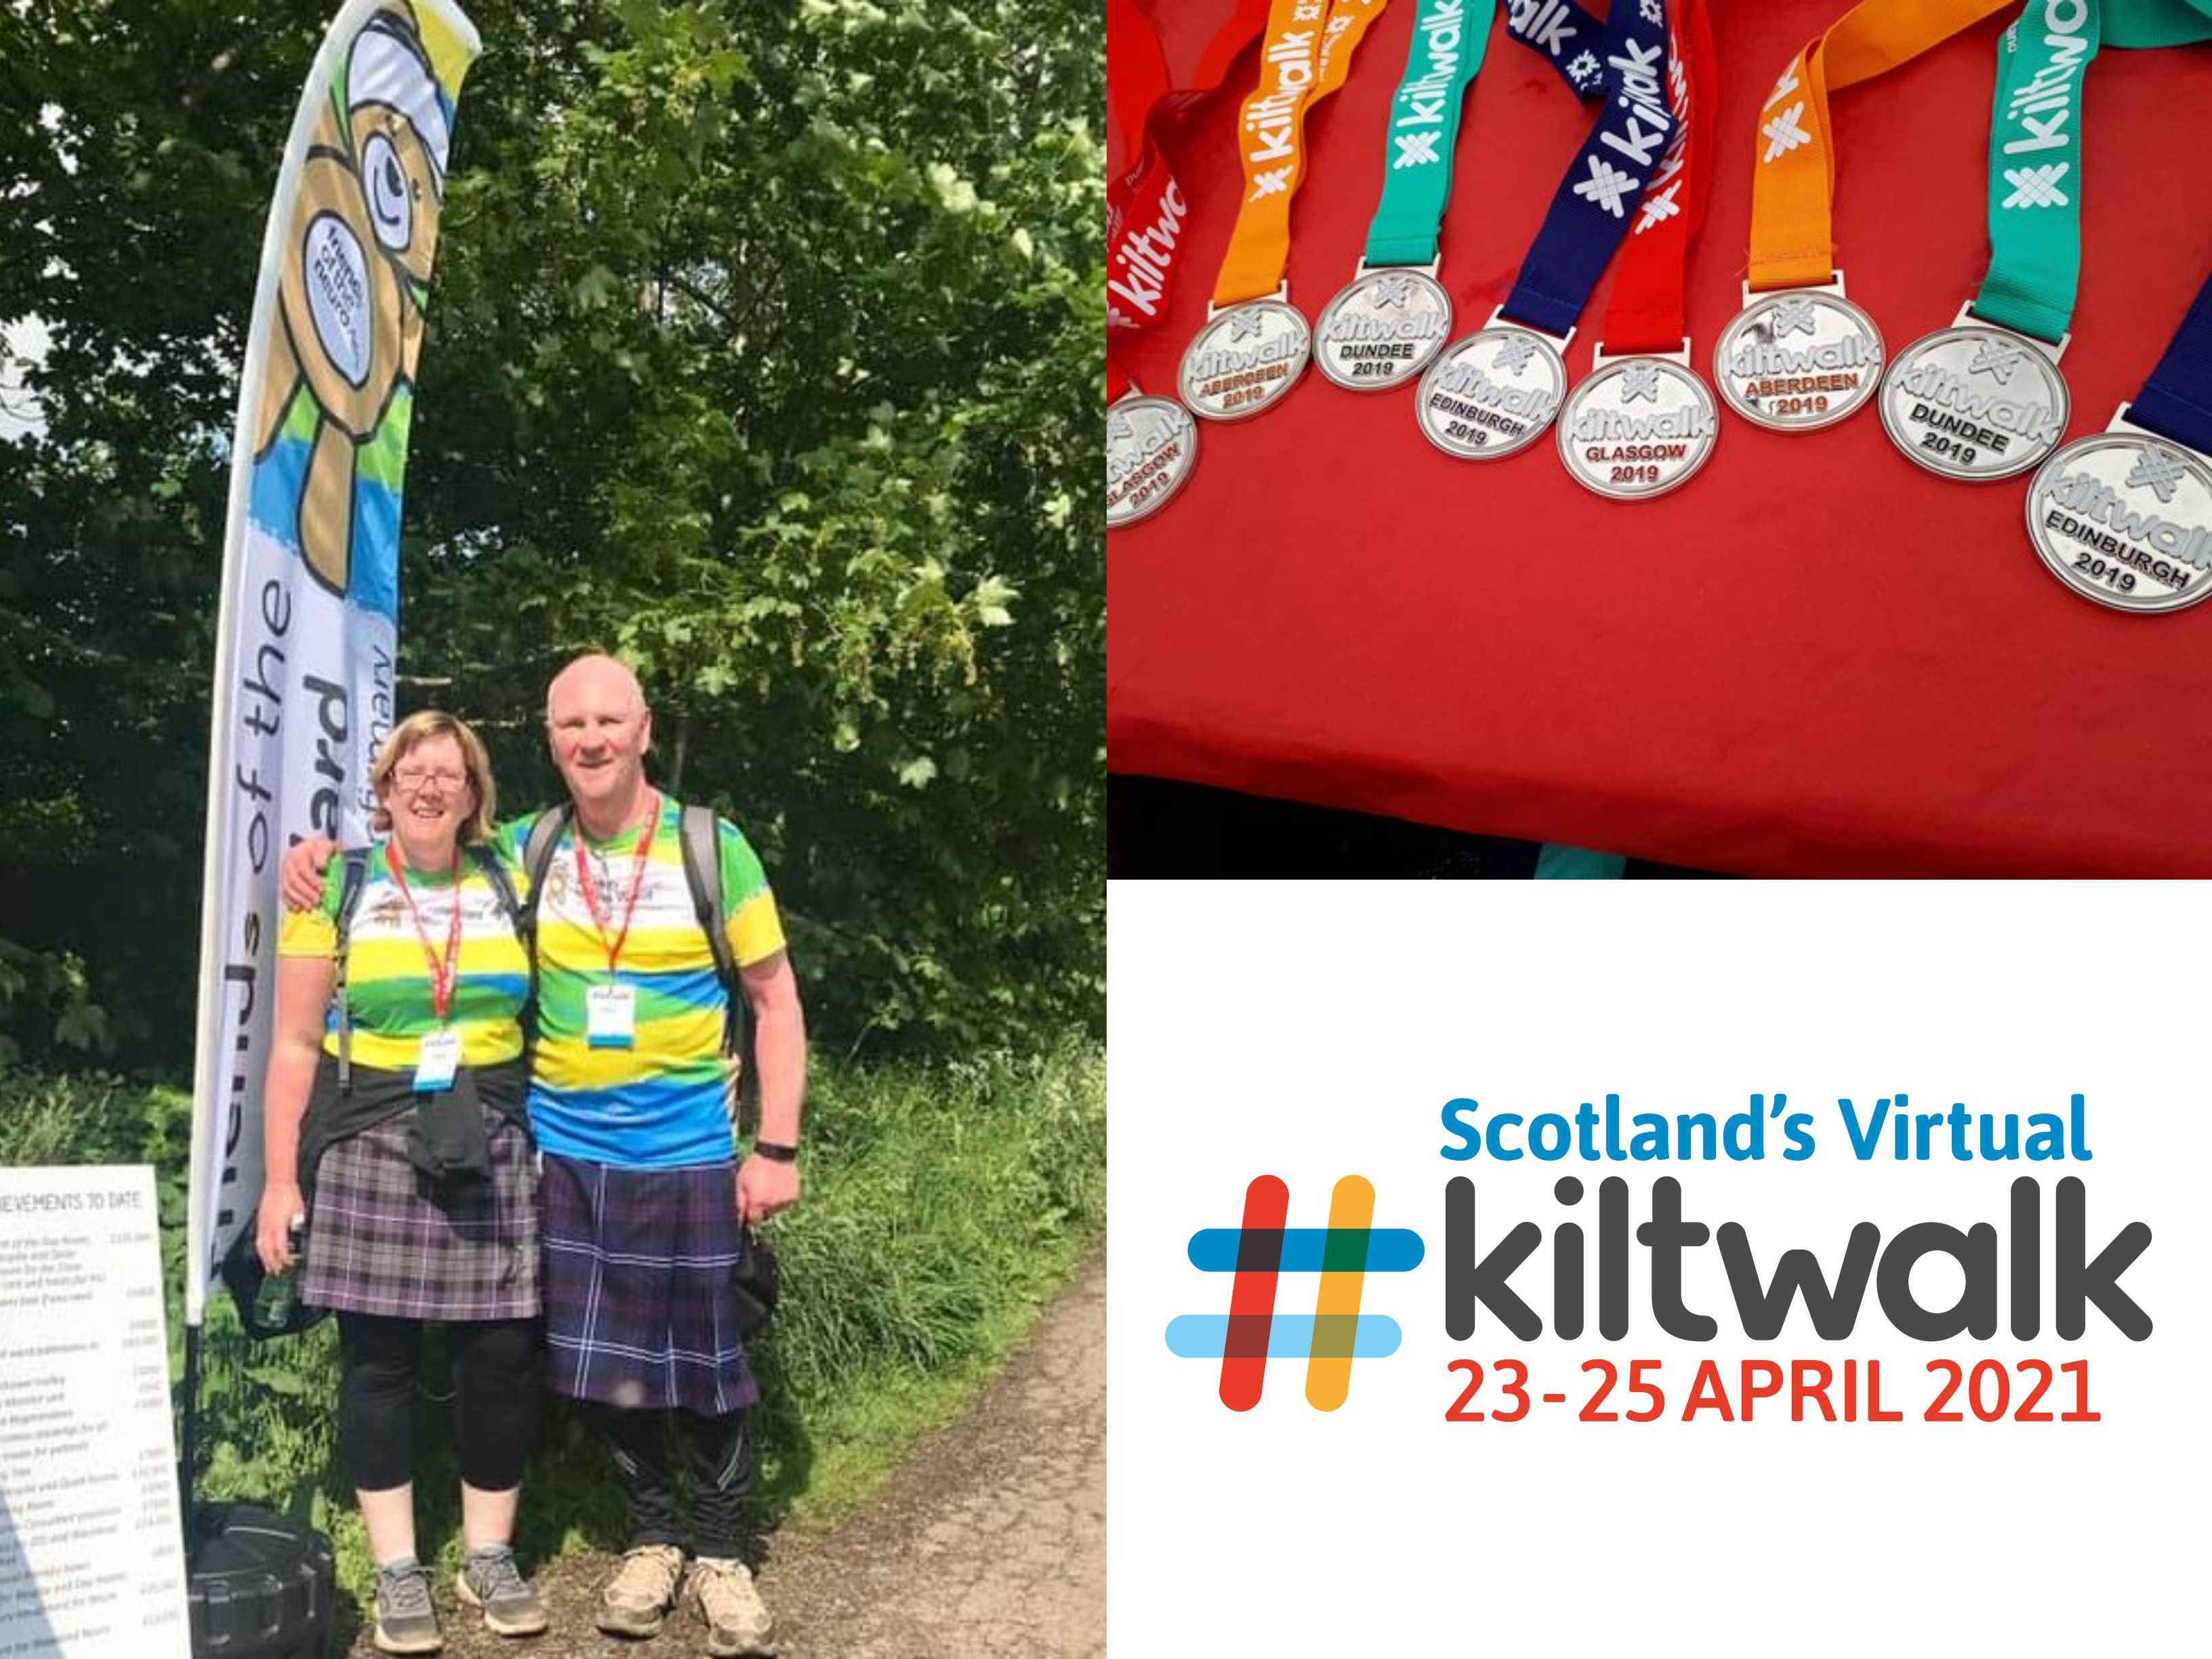 Kiltwalk regular Sally Adam urges people to sign up to make a big difference, one step at a time